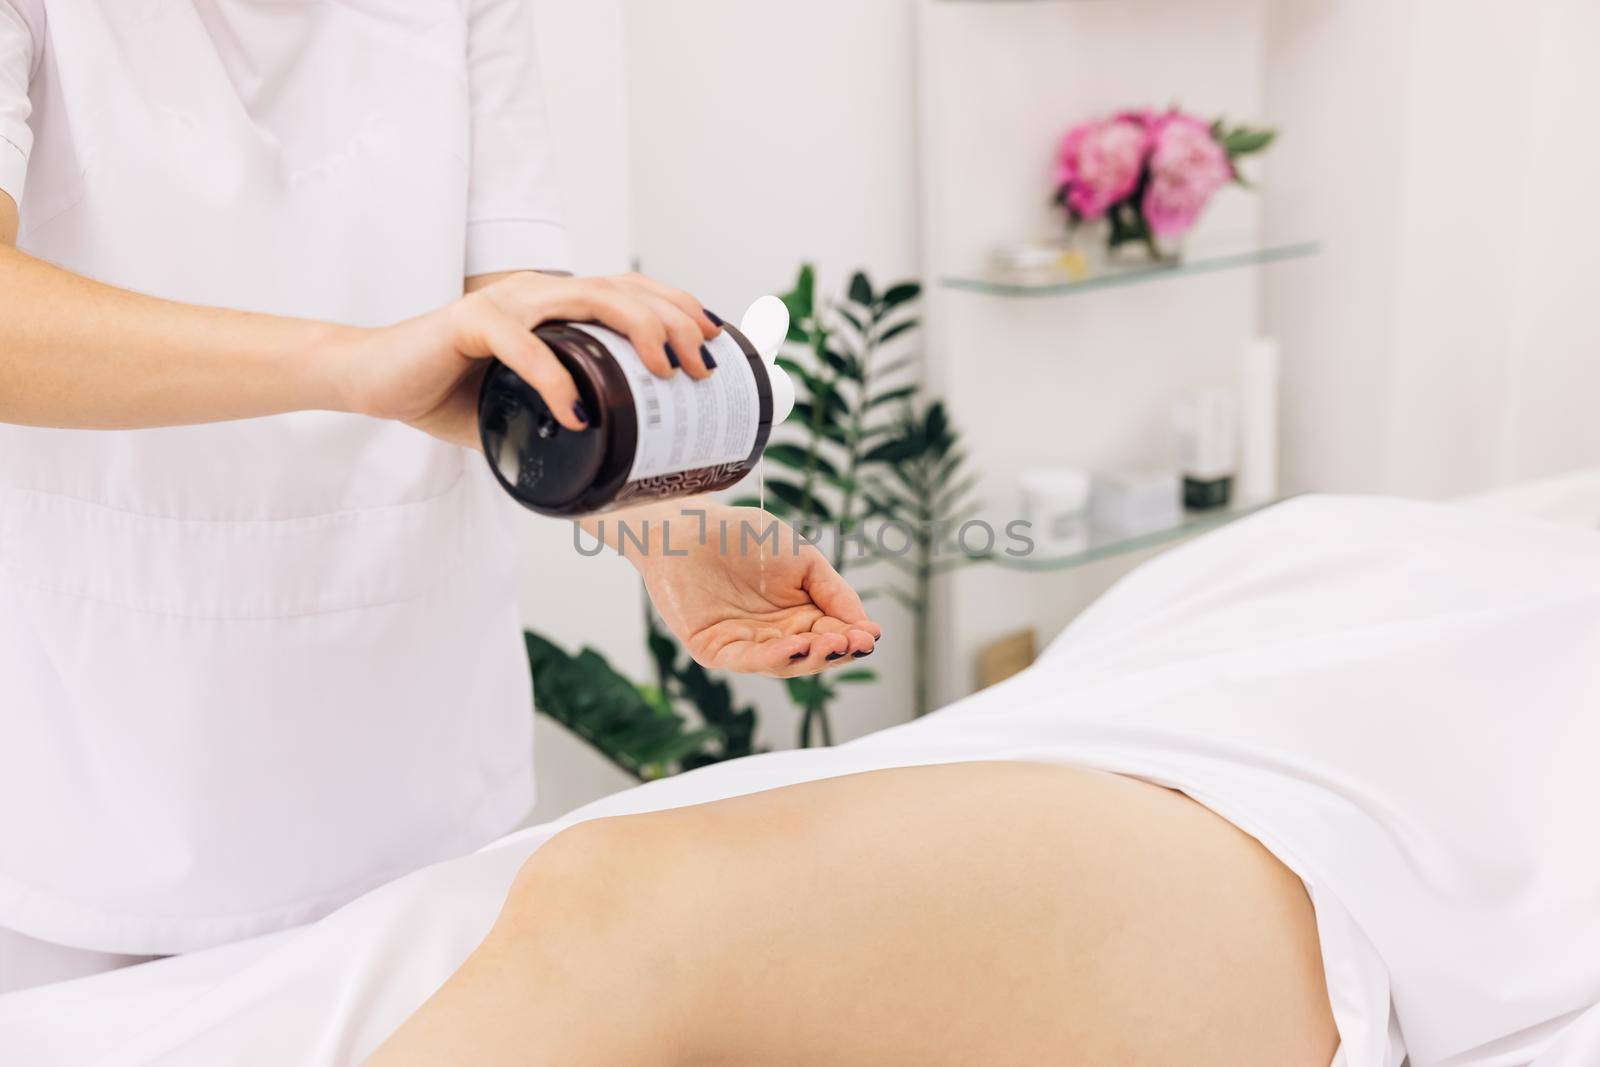 Therapeutic massage of the female leg. Woman hands doing professional massage. Creme treatment on woman legs with hydrating lotion. Preventing dry skin on female body parts close-up.